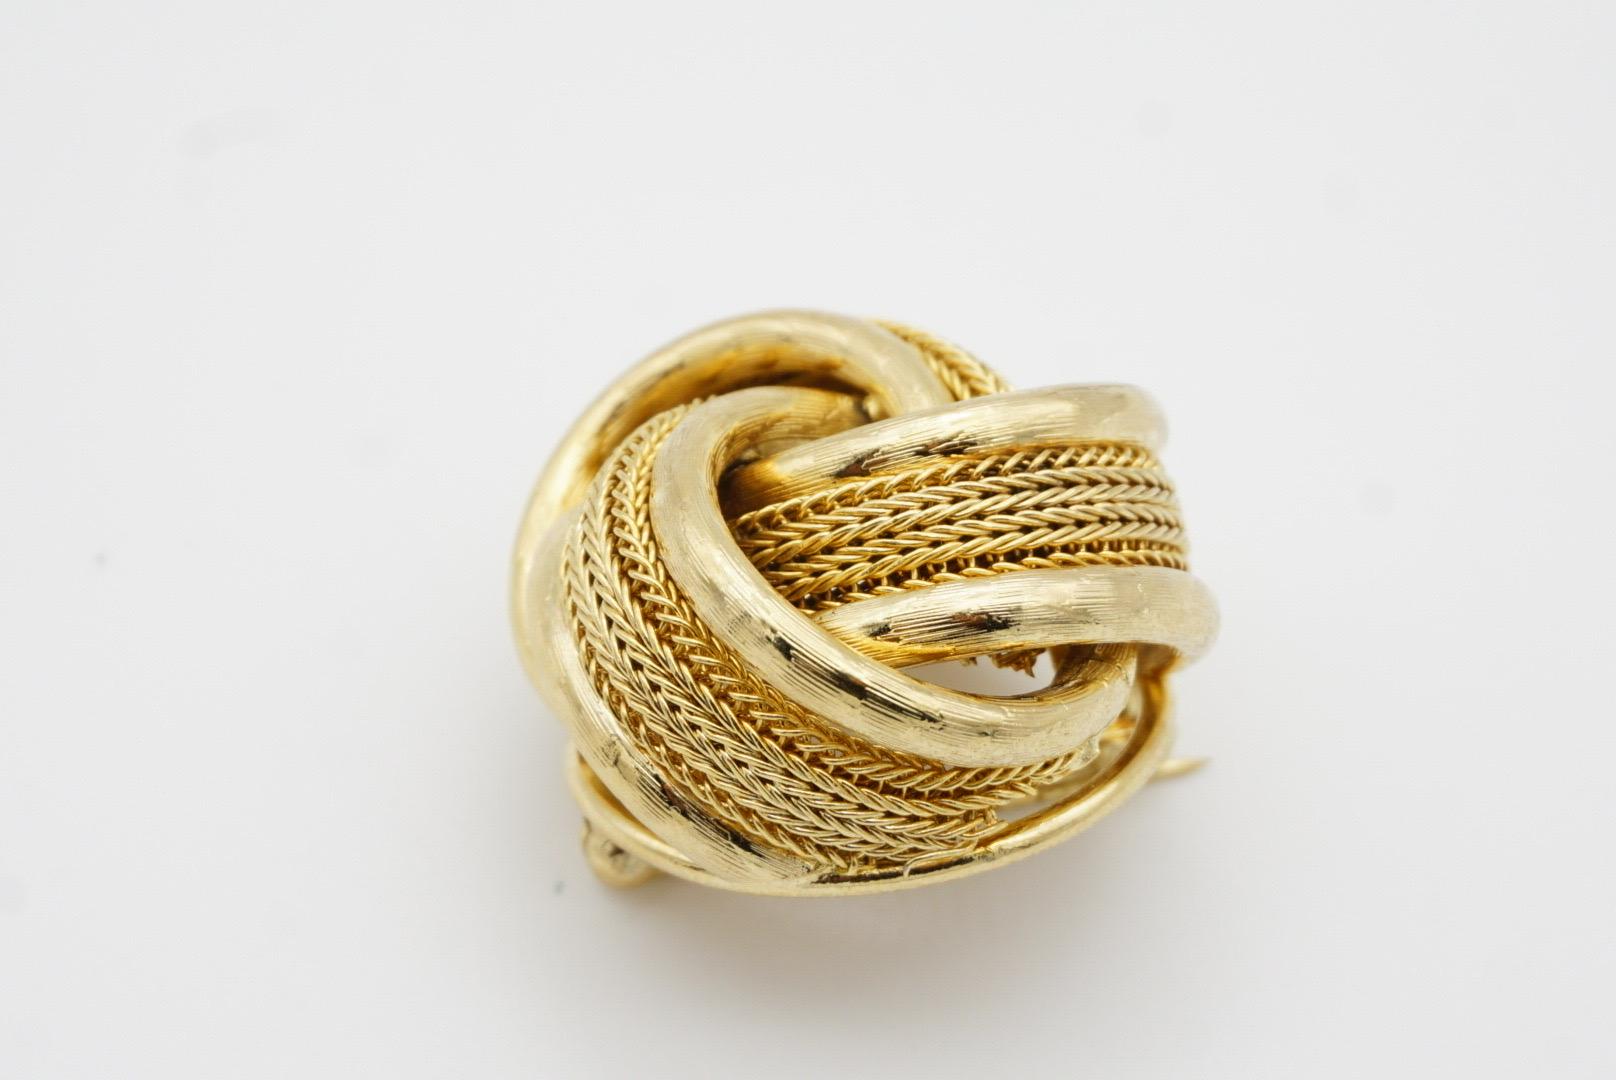 Christian Dior GROSSE 1963 Vintage Knot Rope Glow Mesh Swirl Twist Dome Brooch For Sale 7